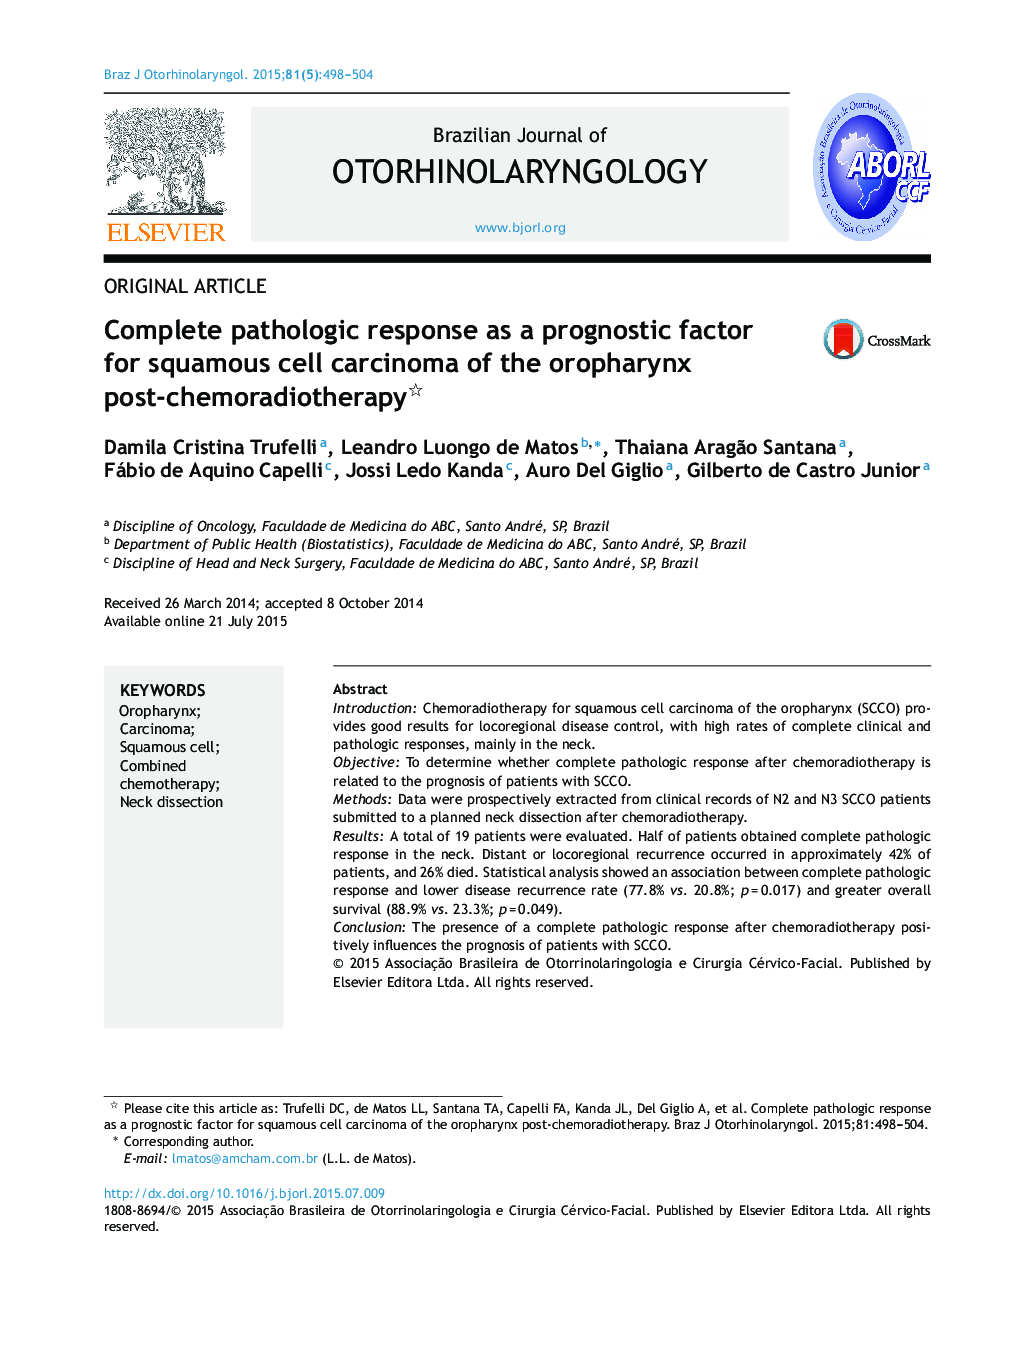 Complete pathologic response as a prognostic factor for squamous cell carcinoma of the oropharynx post-chemoradiotherapy 